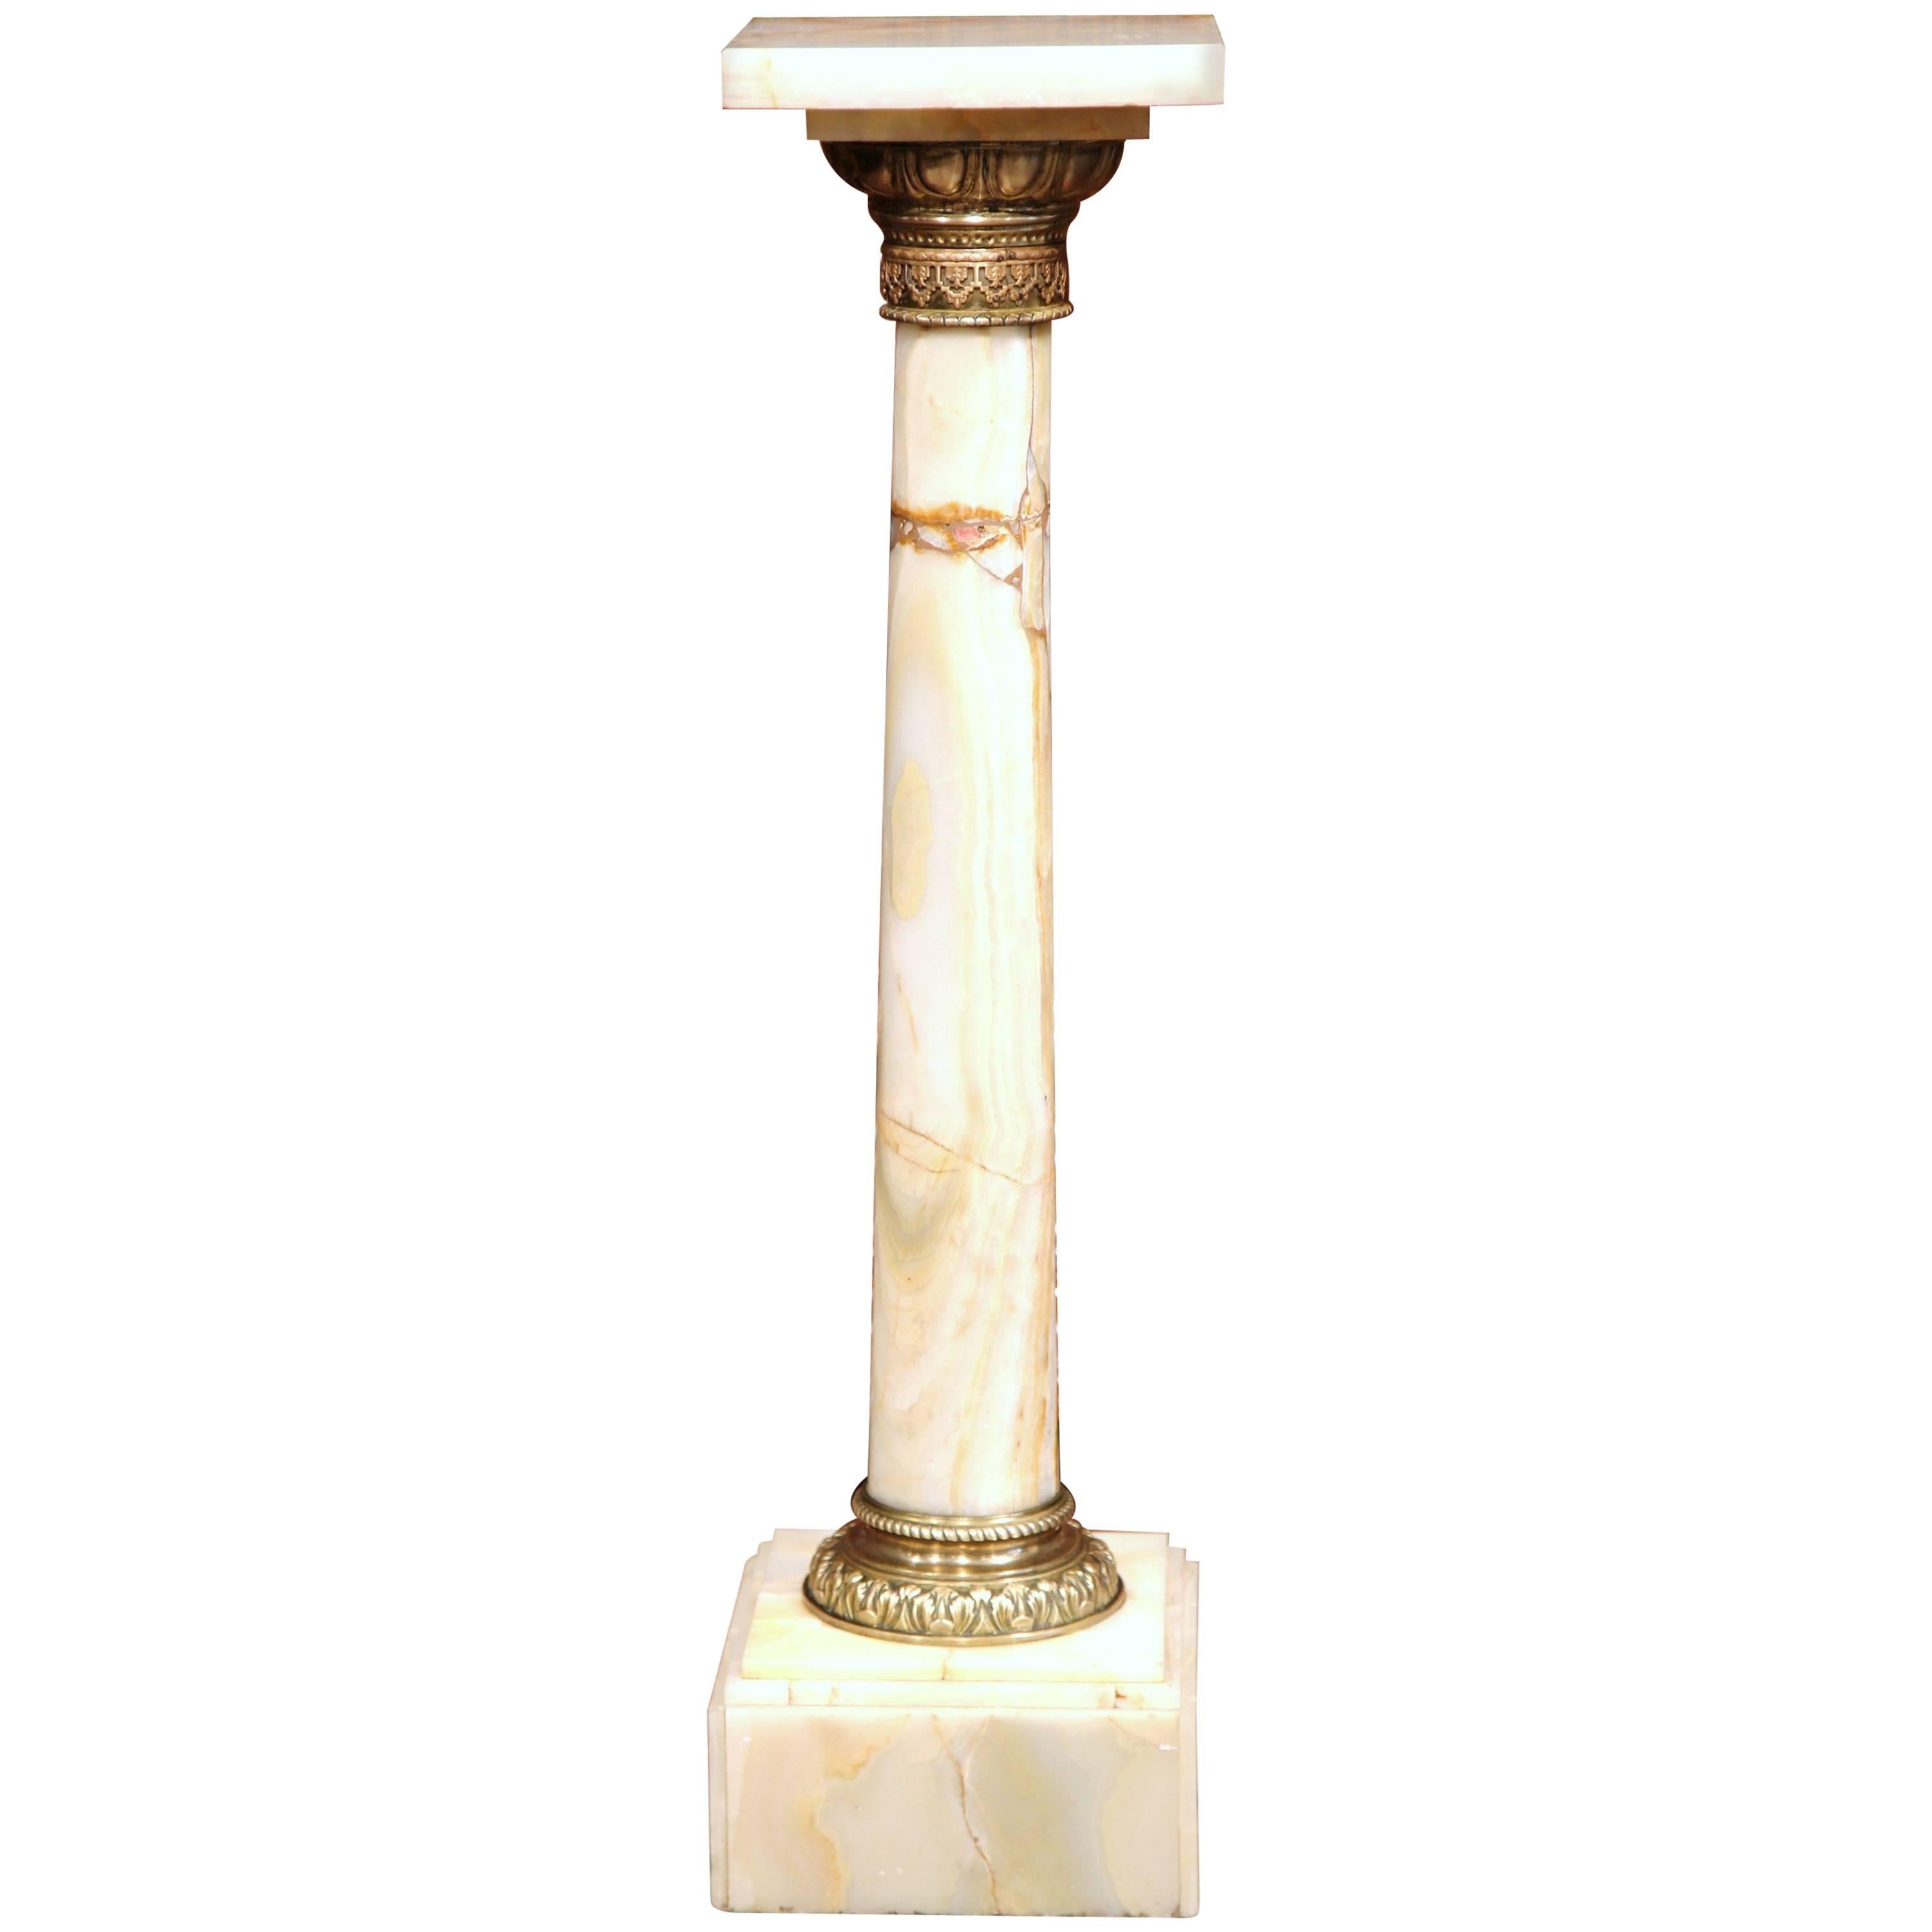 19th Century French White Onyx and Gilt Bronze-Mounted Pedestal